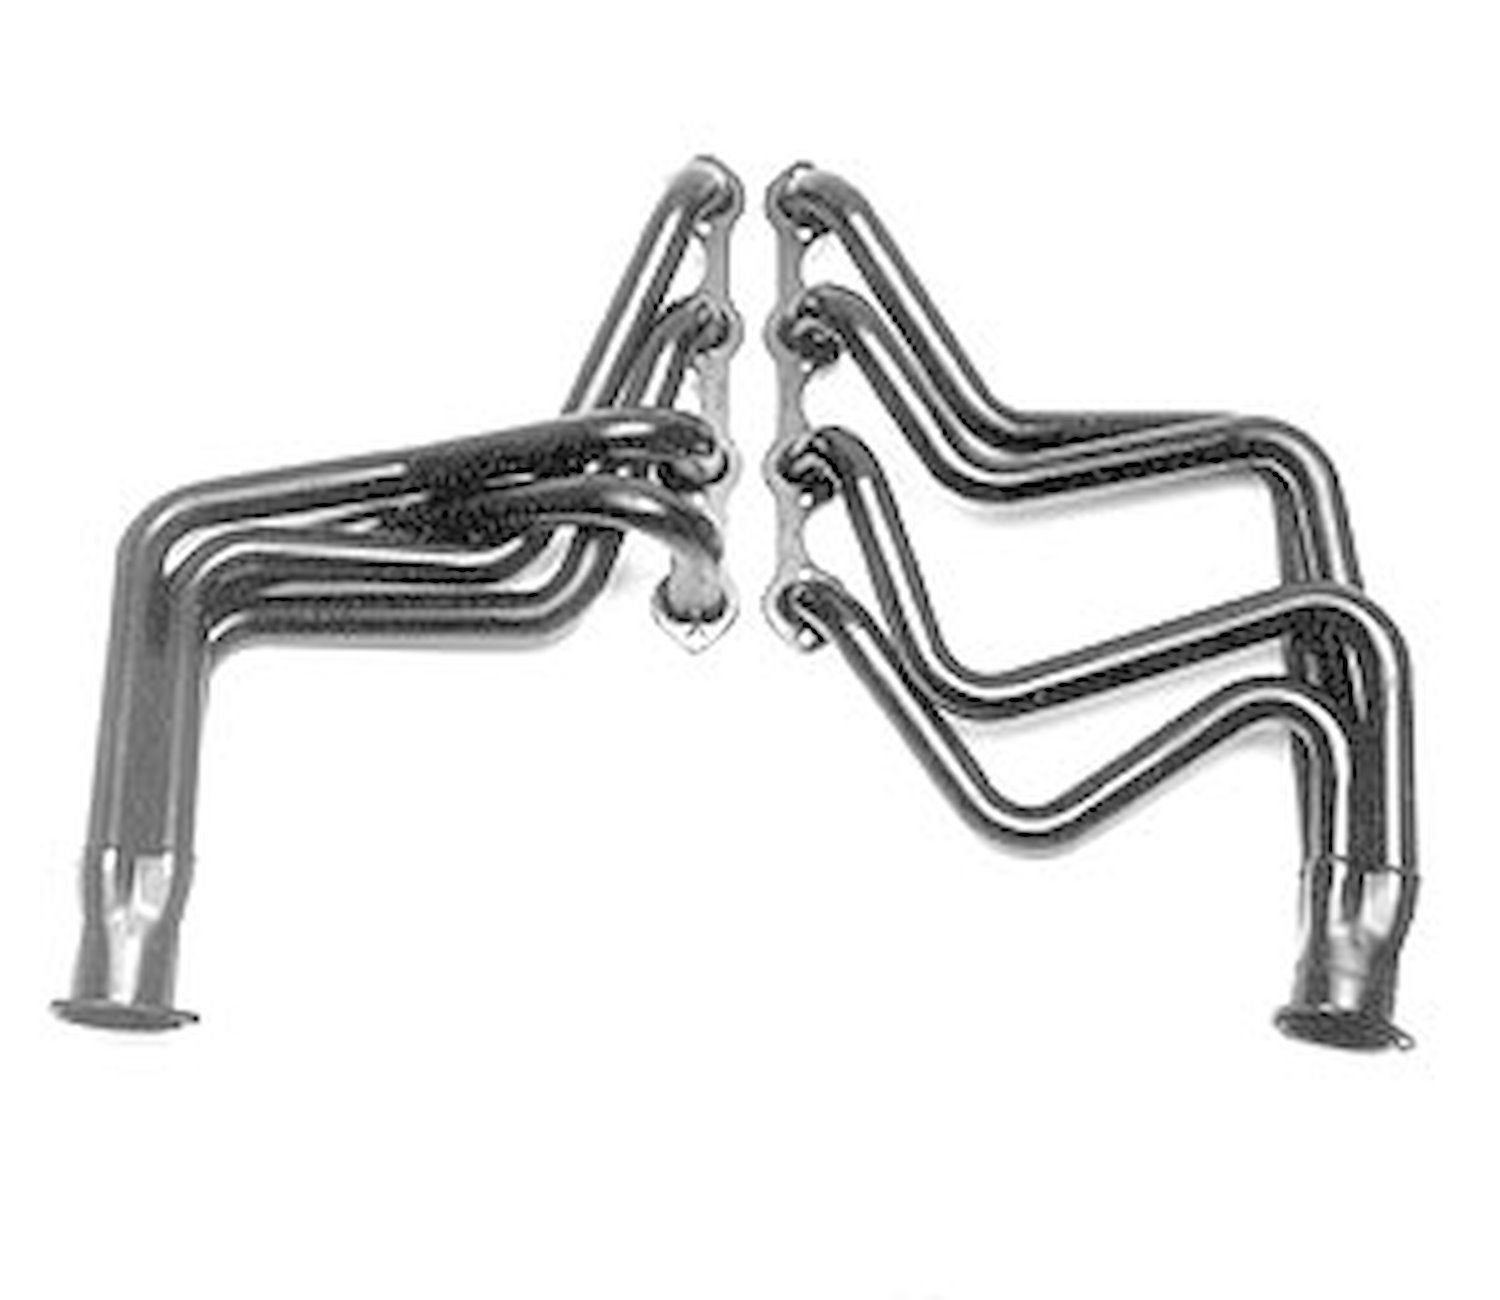 Standard Duty Uncoated Headers for 1980-95 1/2 - 1 Ton 2WD Pickup